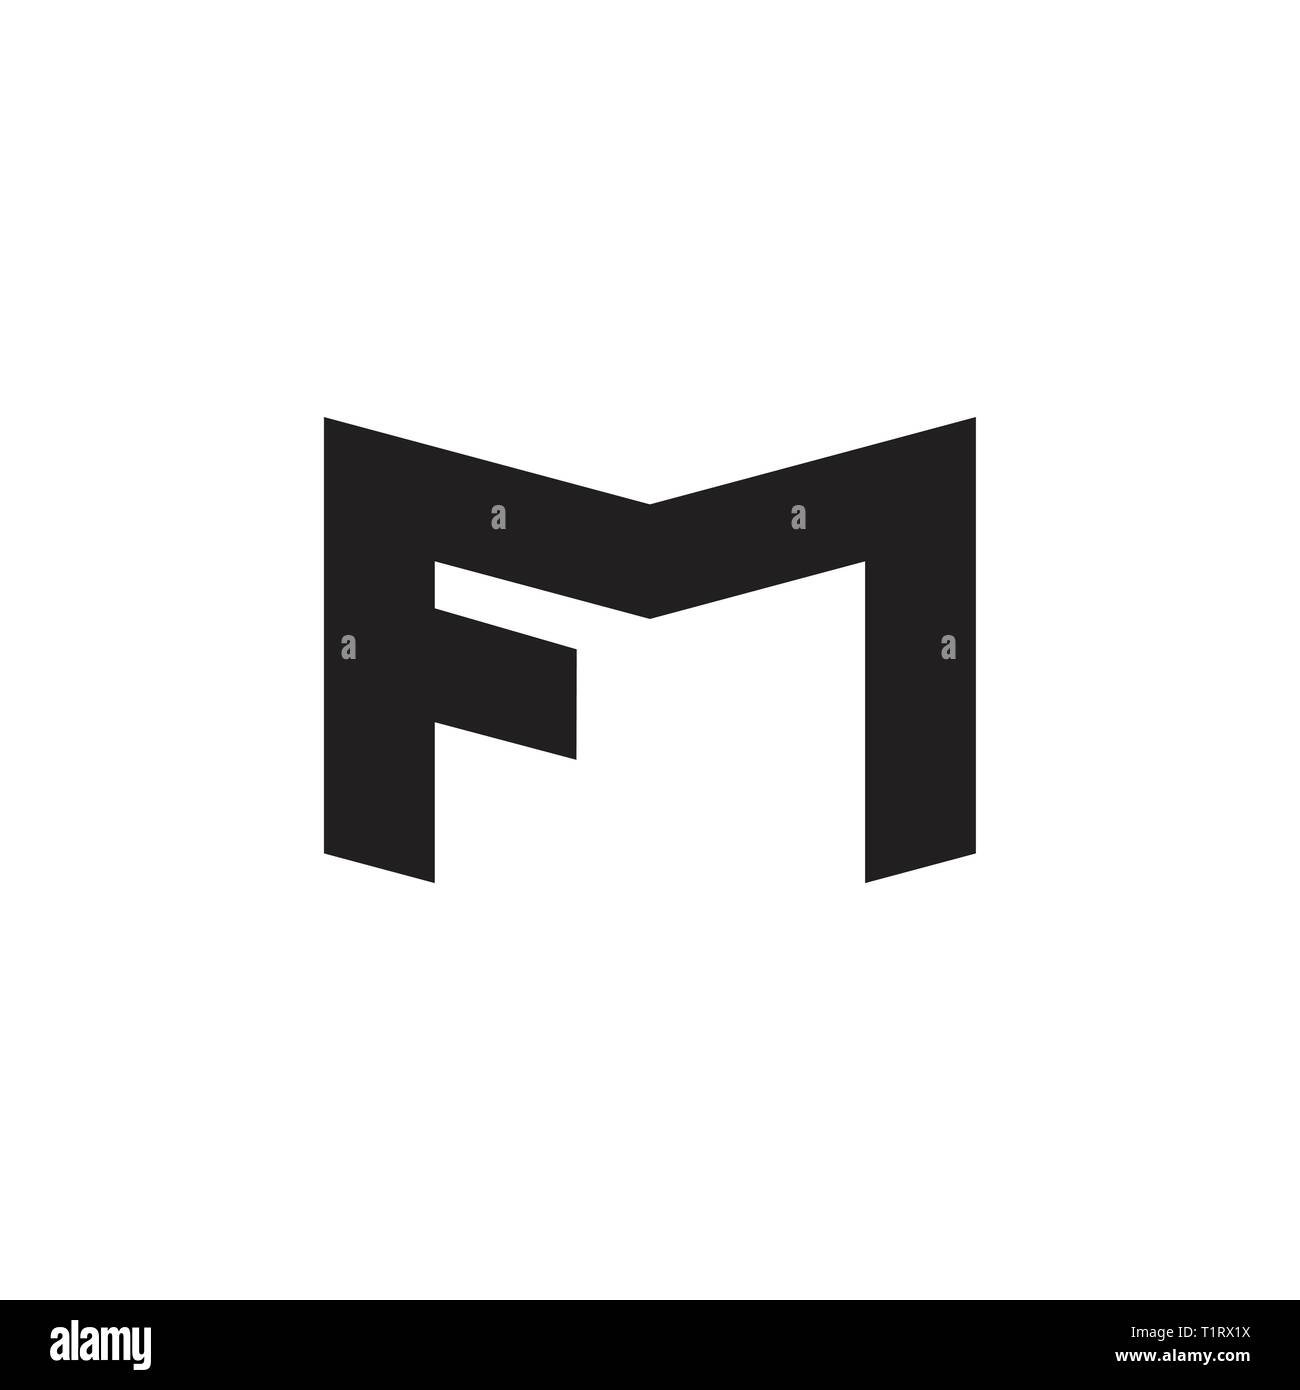 abstract letters fm simple geometric logo vector Stock Vector